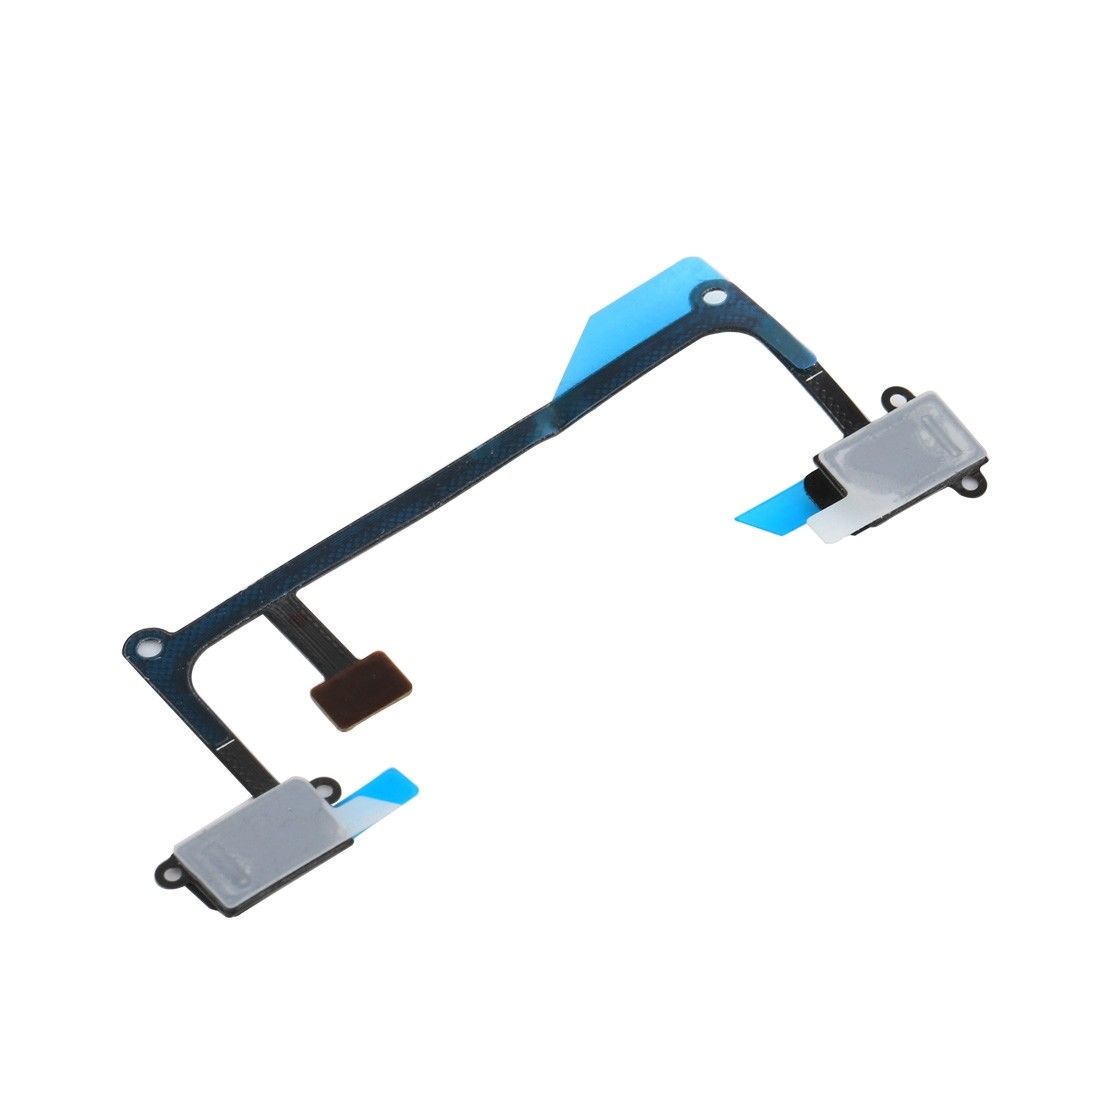 Samsung Galaxy Tab S3 9.7 Replacement Navigation Touch Button Flex Cable for [product_price] - First Help Tech